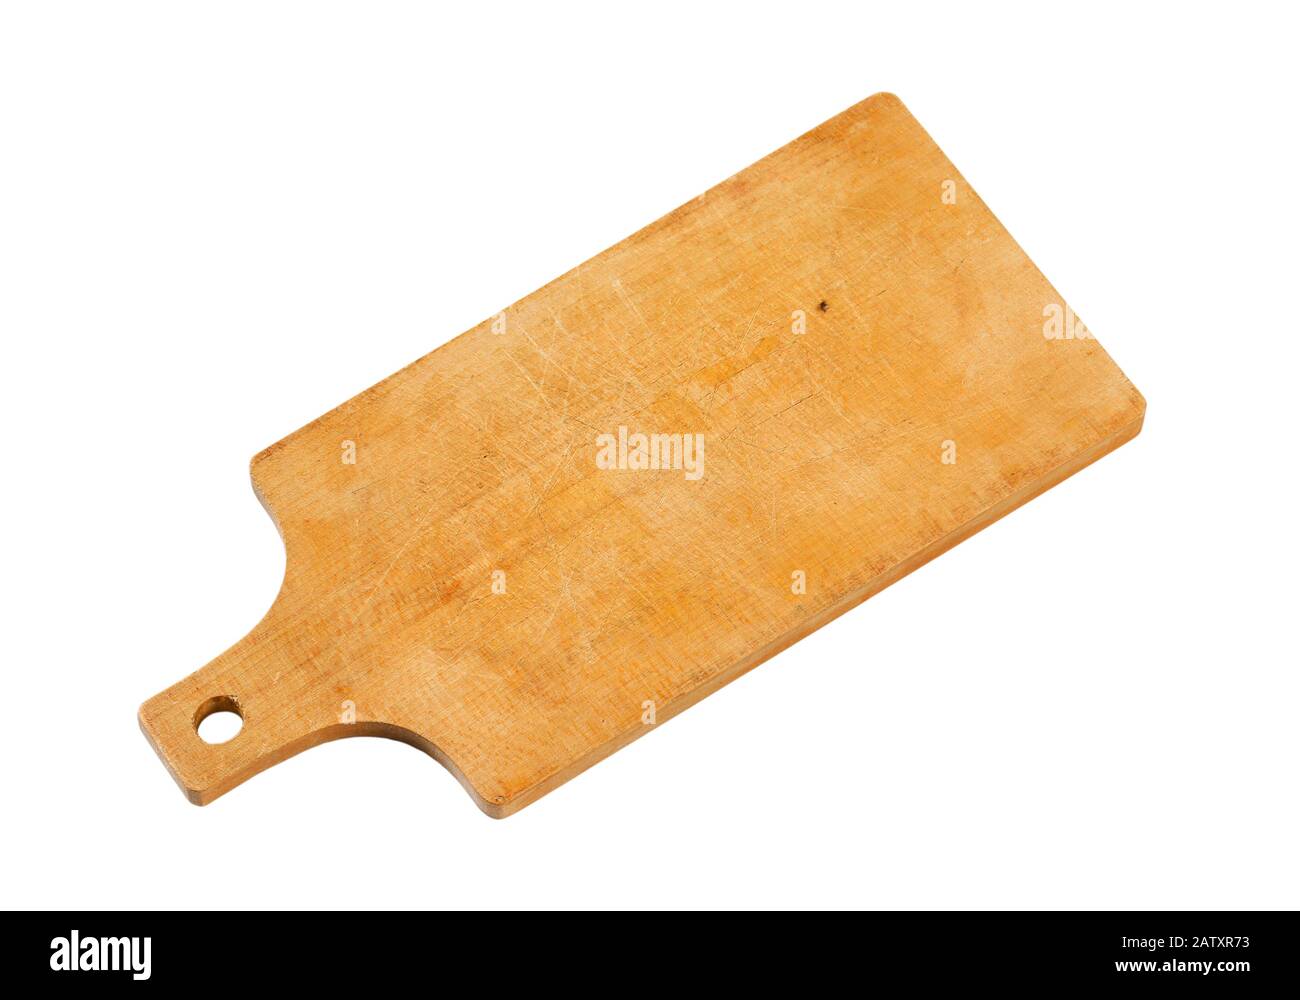 Wooden cutting board with handle isolated on white Stock Photo